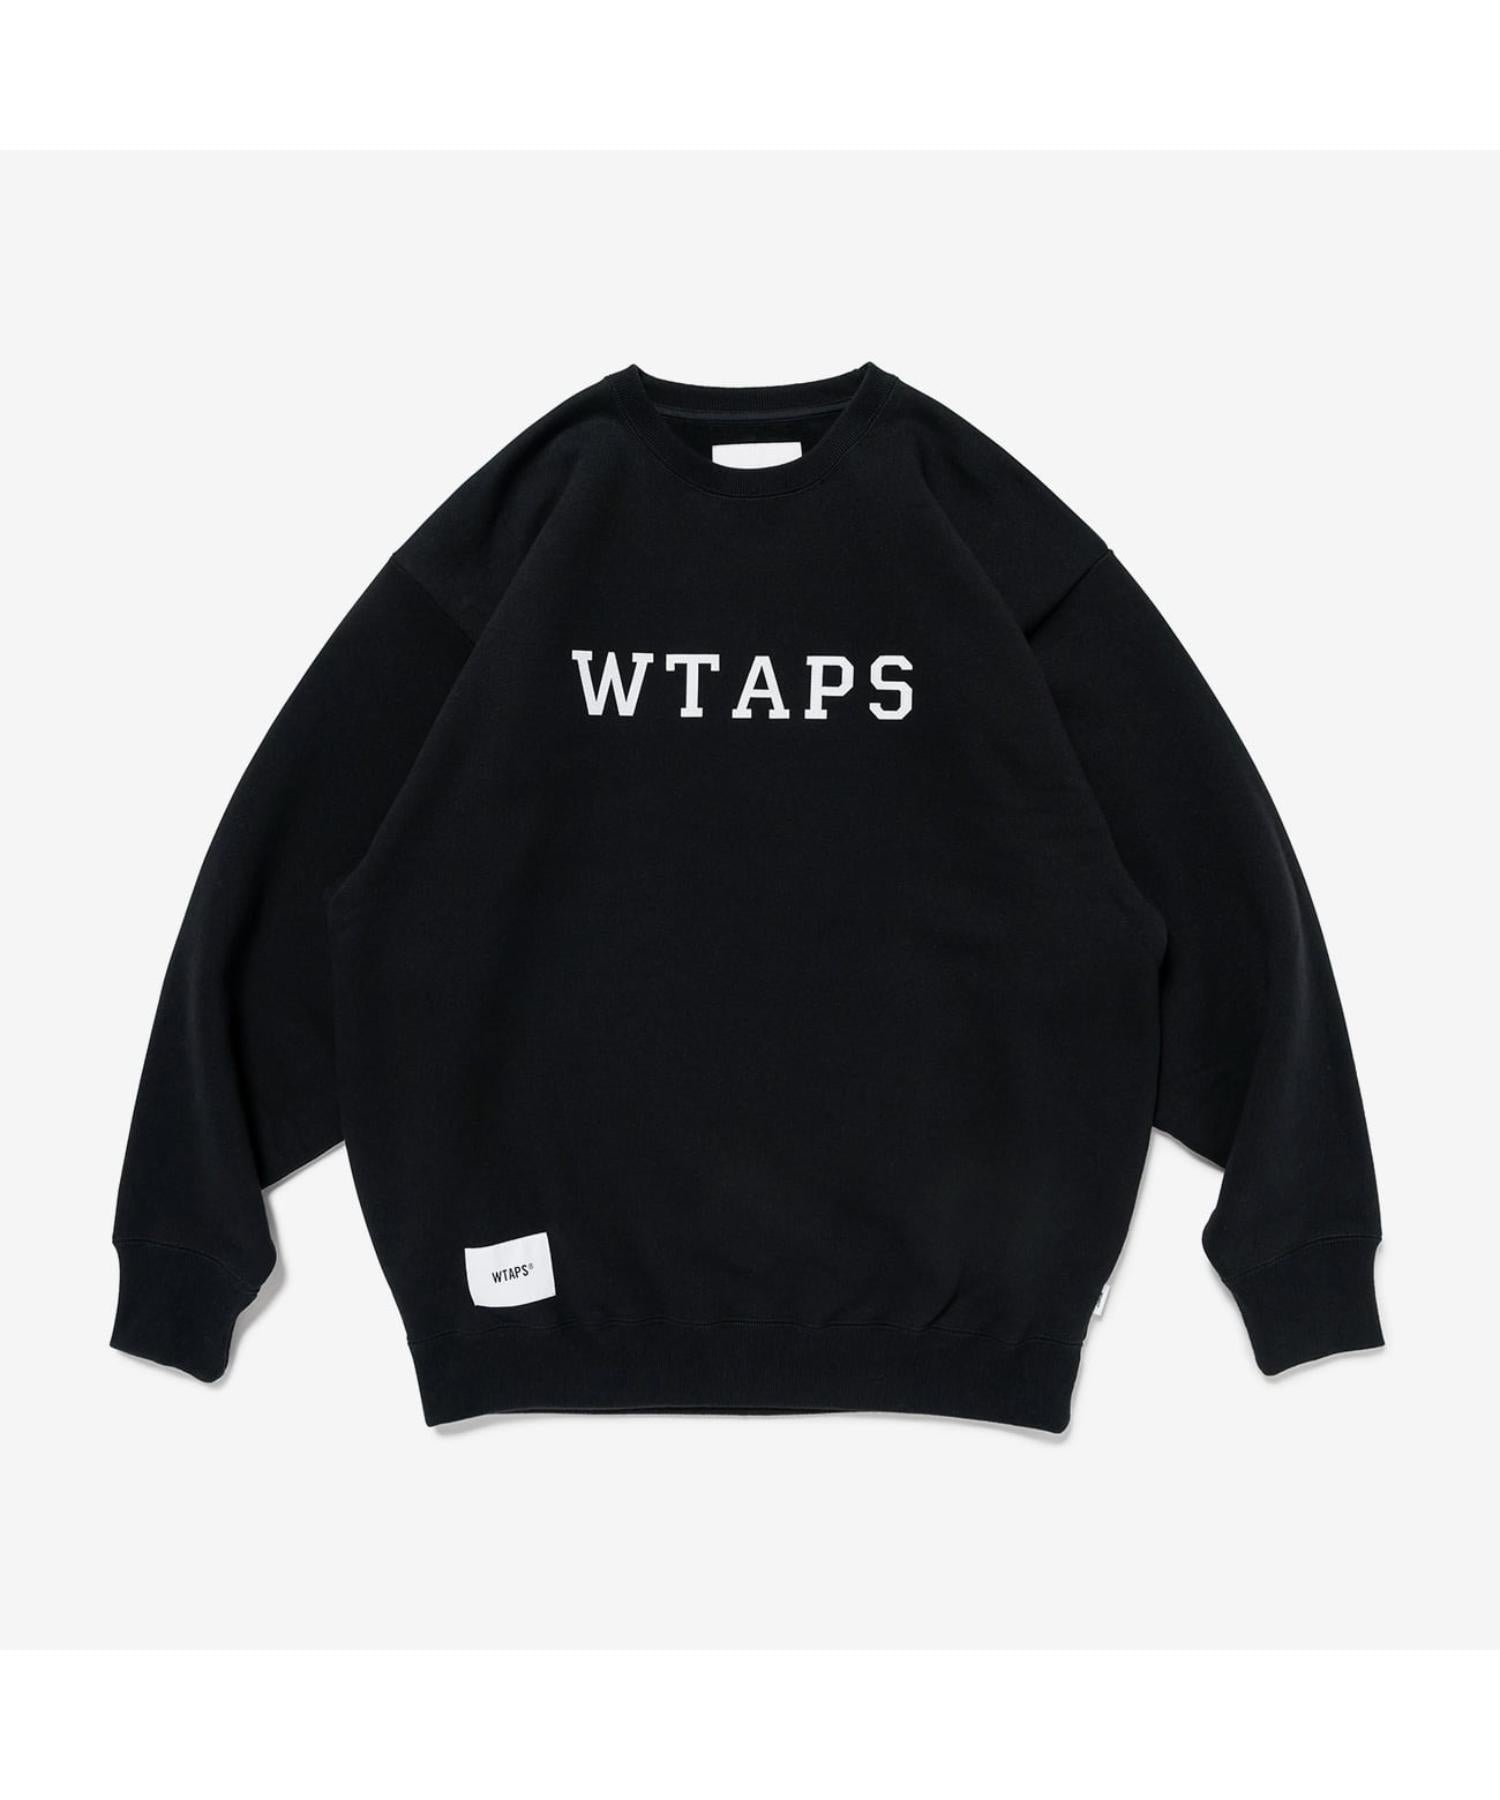 ACADEMY / SWEATER / COTTON. COLLEGE - WTAPS (ダブルタップス ...